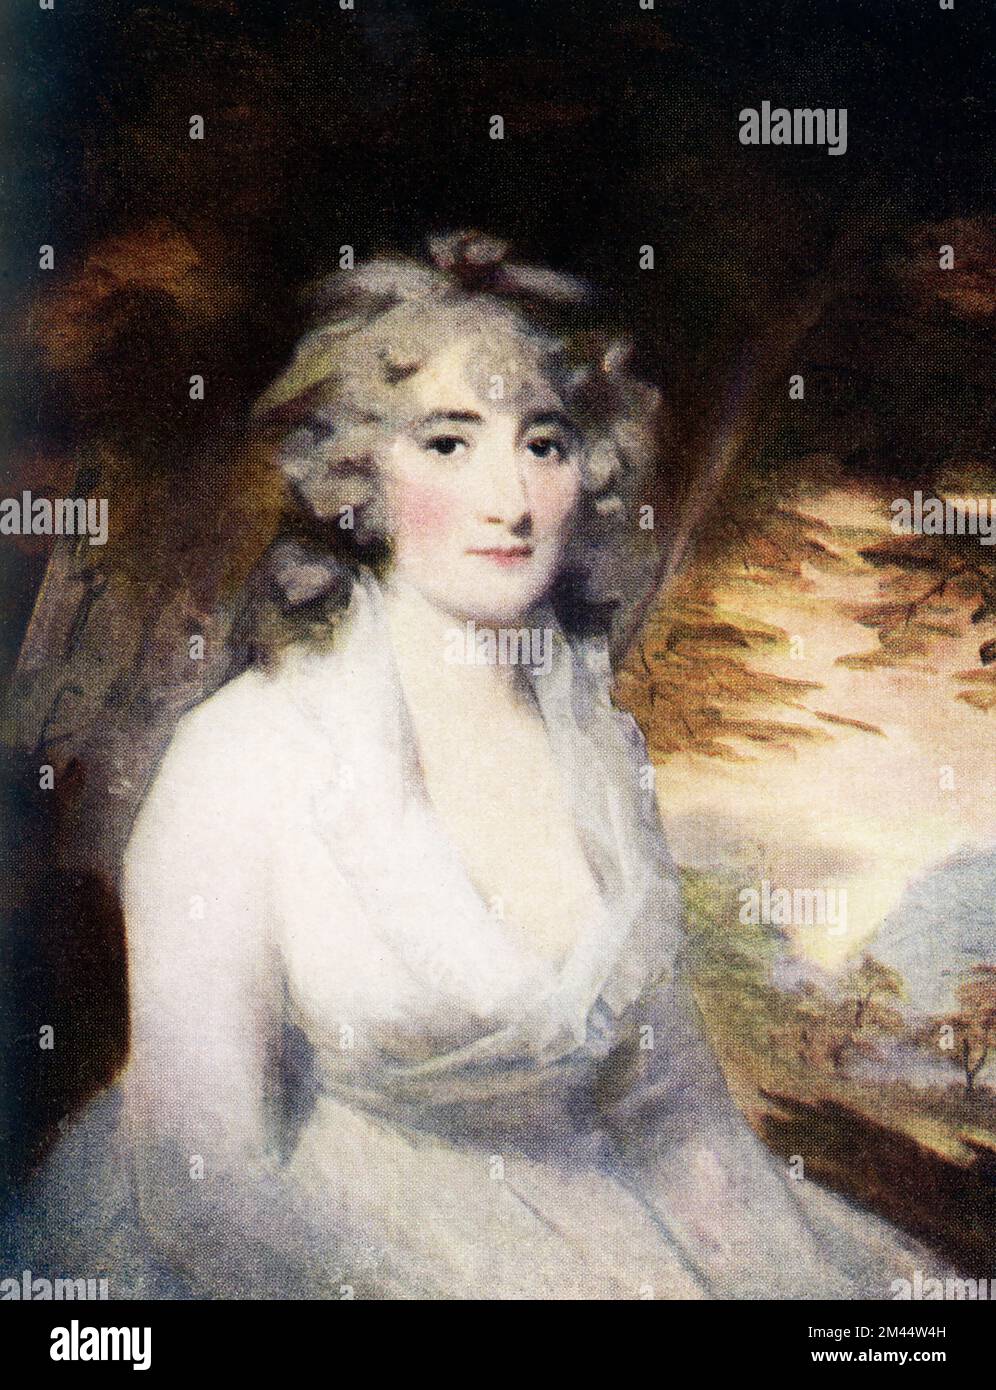 Mrs Lauzun by Raeburn (1756-1823) at National Gallery. Only one of three Raeburns in the National gallery is an adequate example. This is the picture reproduced. It was painted in 1795, and, while very typical technically, possesses greater charm than most of the portraits of women executed by him at that comparatively early date.' Sir Henry Raeburn (1756 – 1823) was a Scottish portrait painter. He served as Portrait Painter to King George IV in Scotland. Stock Photo